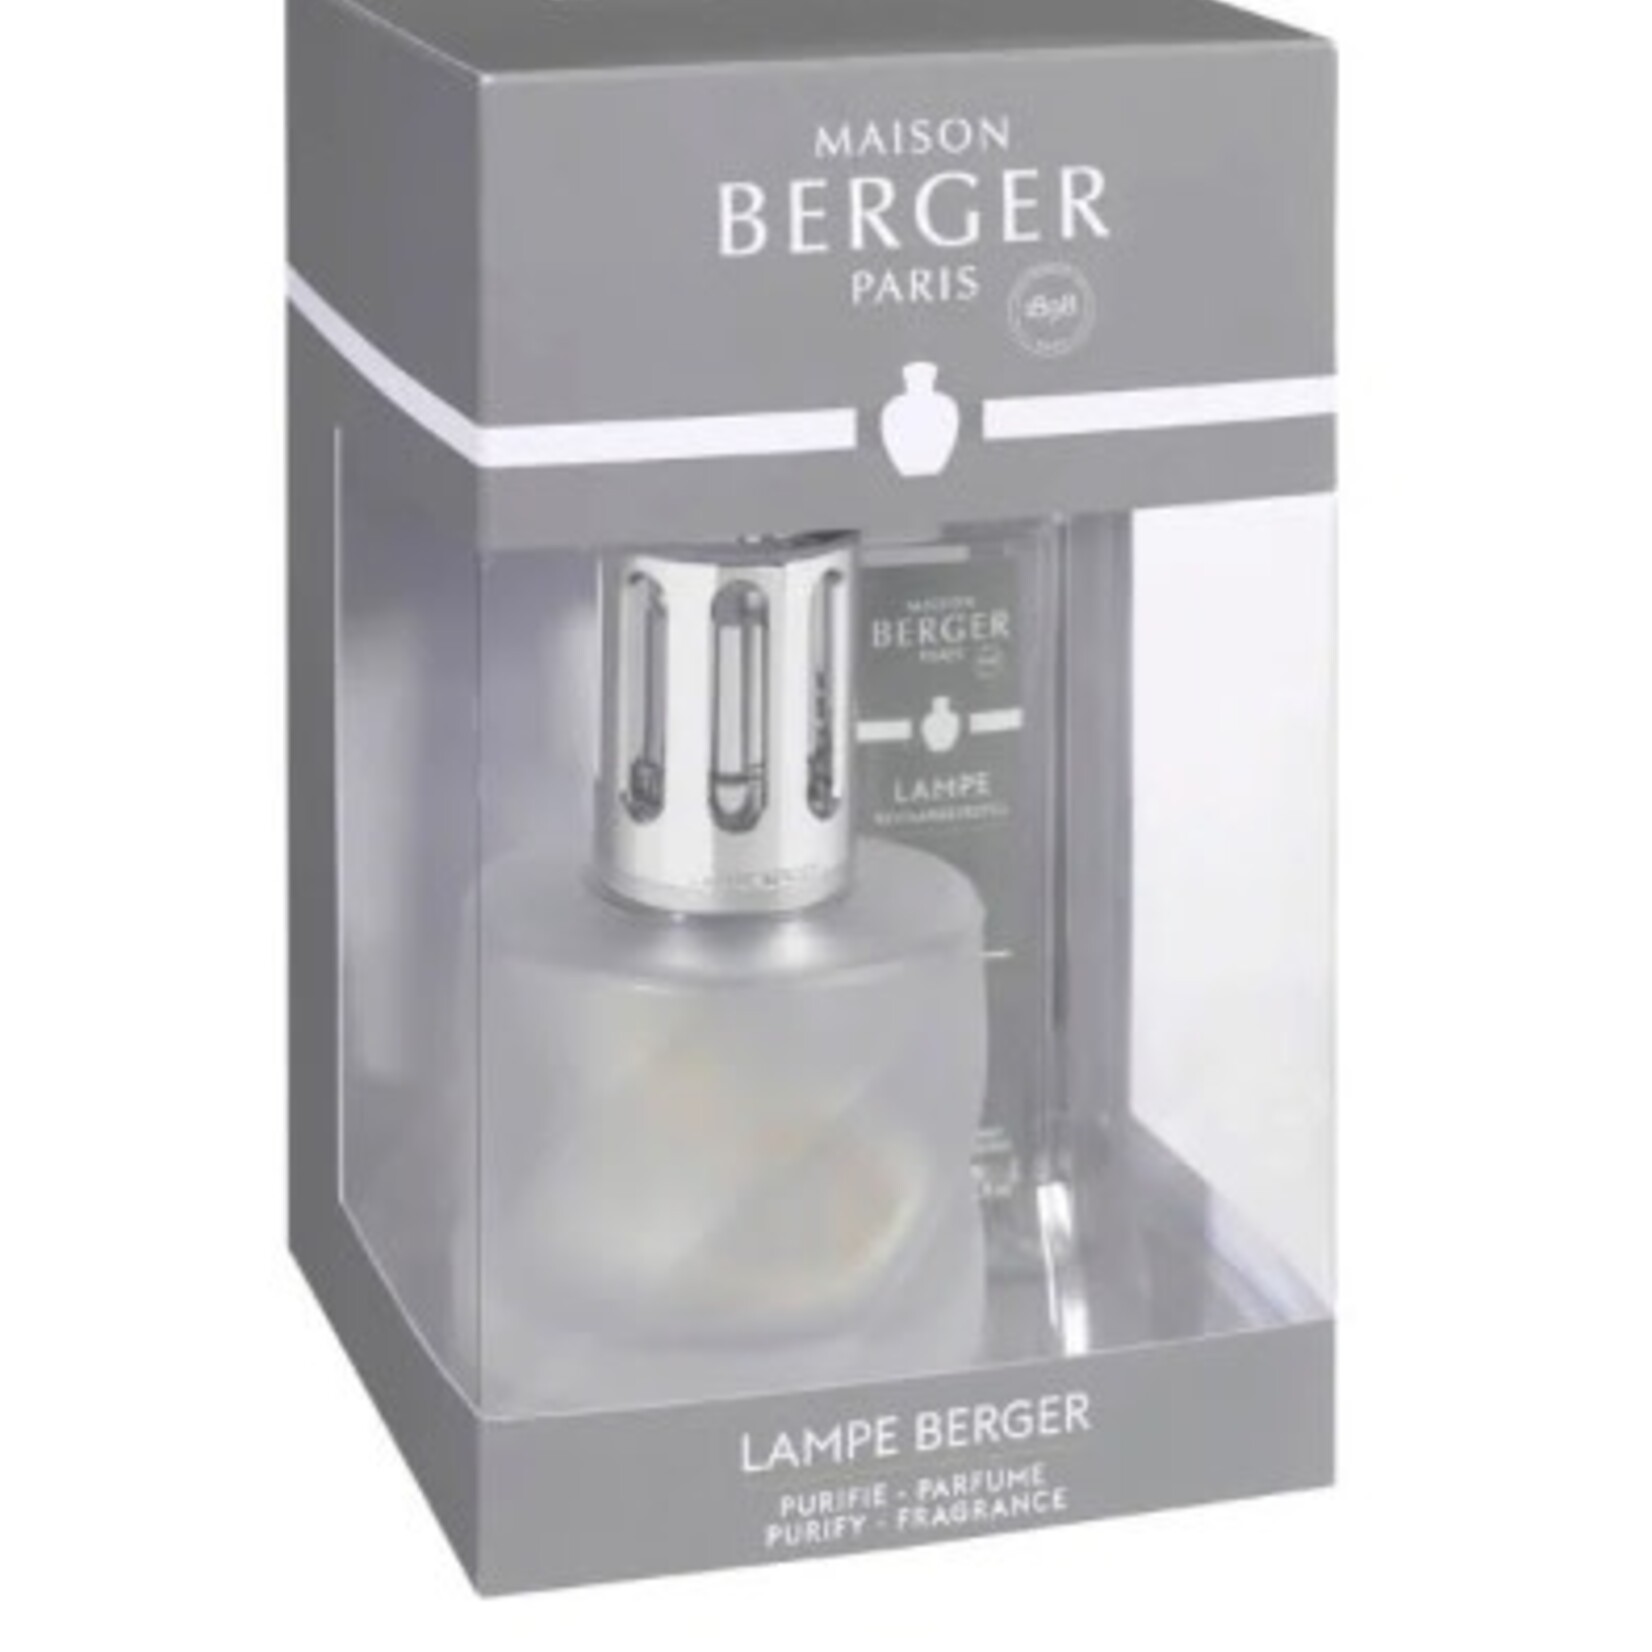 Maison Berger Paris Spirale Lamp Gift Set with Summer Night Frosted